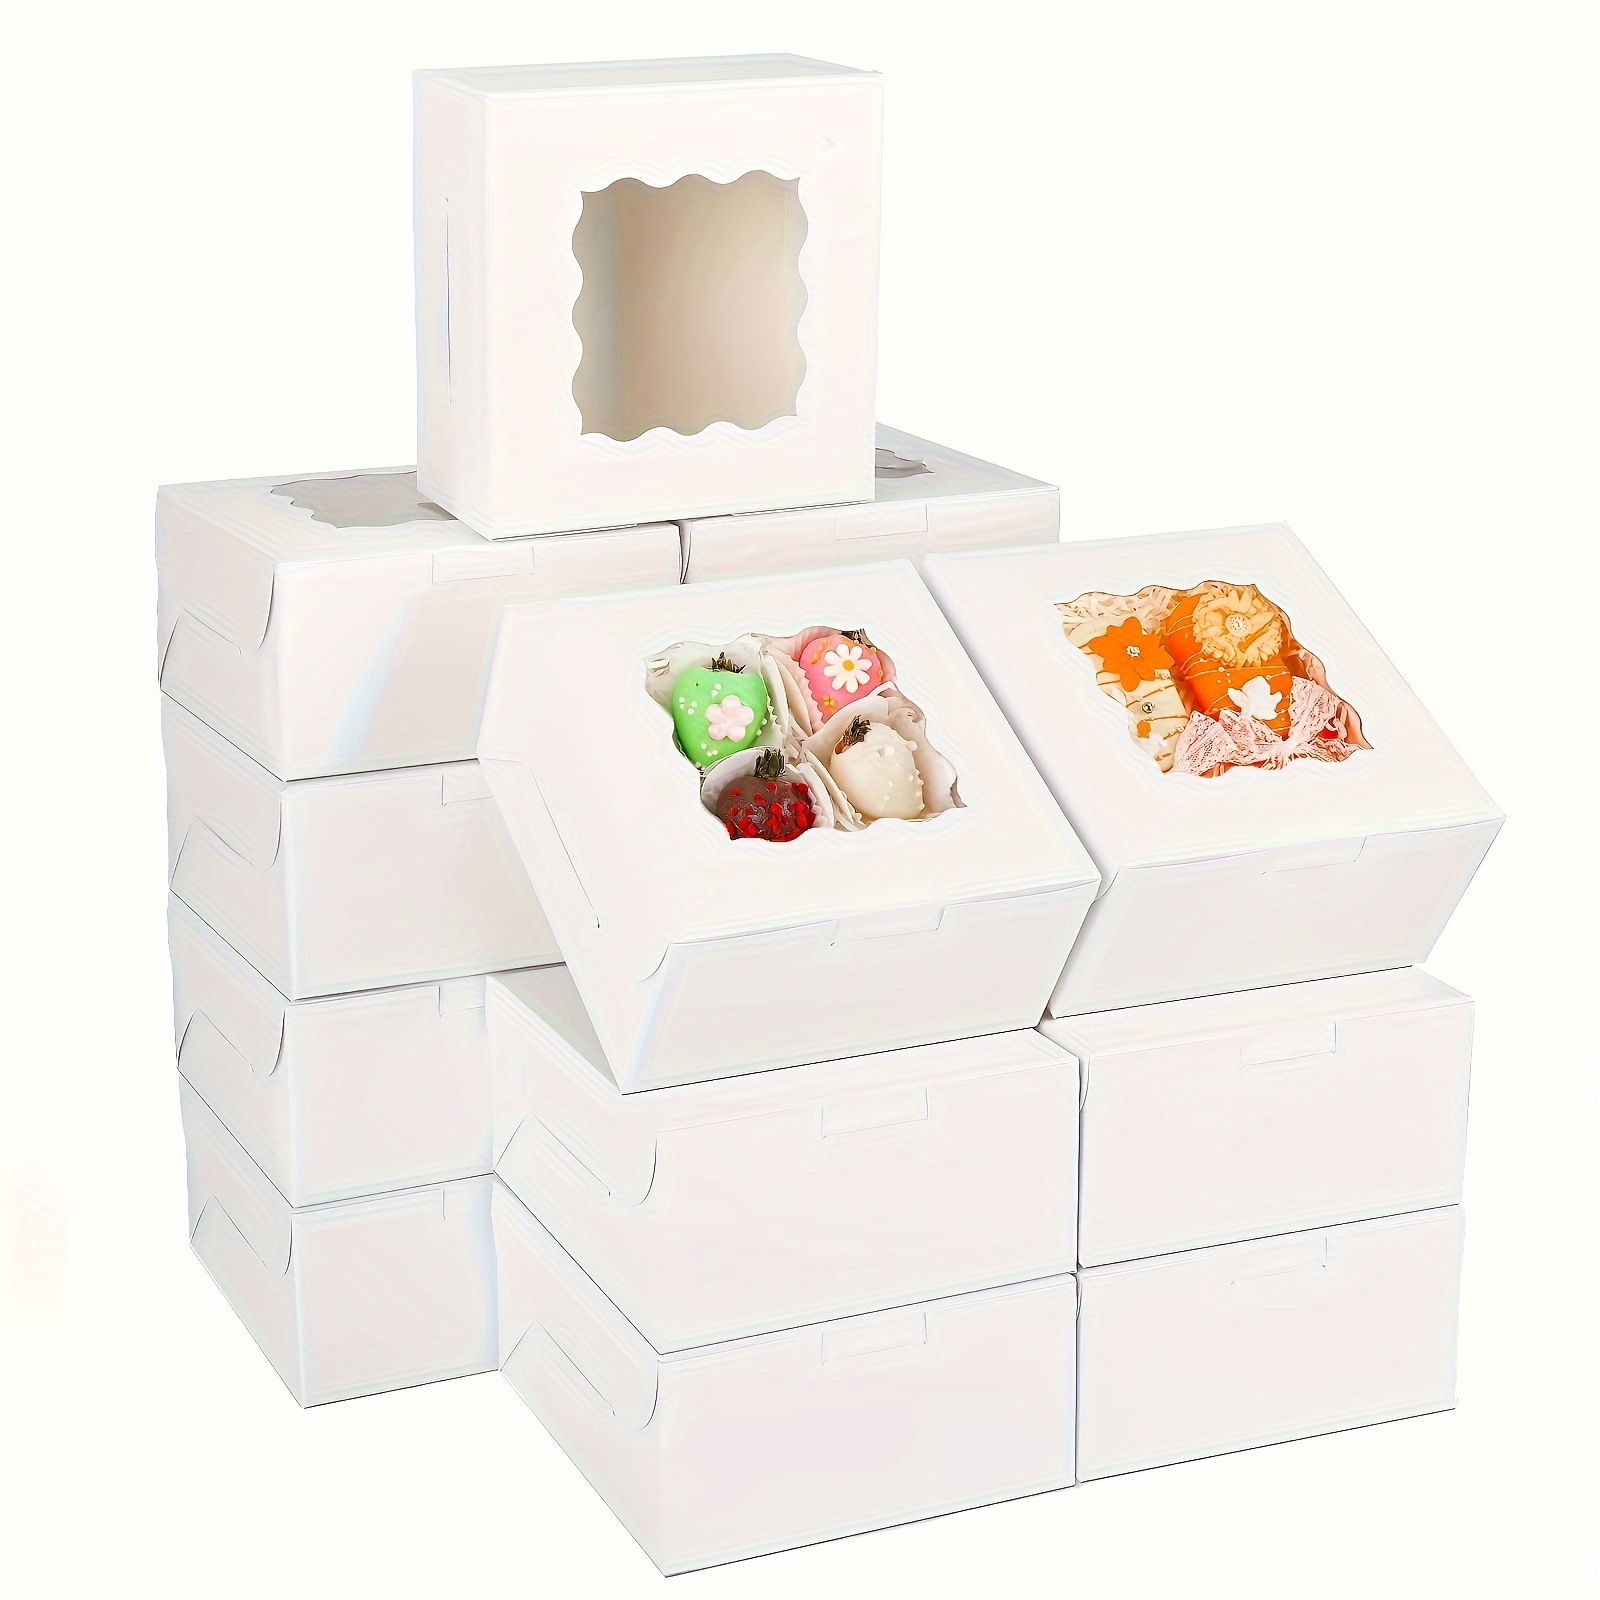  Airplane Shaped Acrylic Candy Boxes - 12 Pack - 3.77